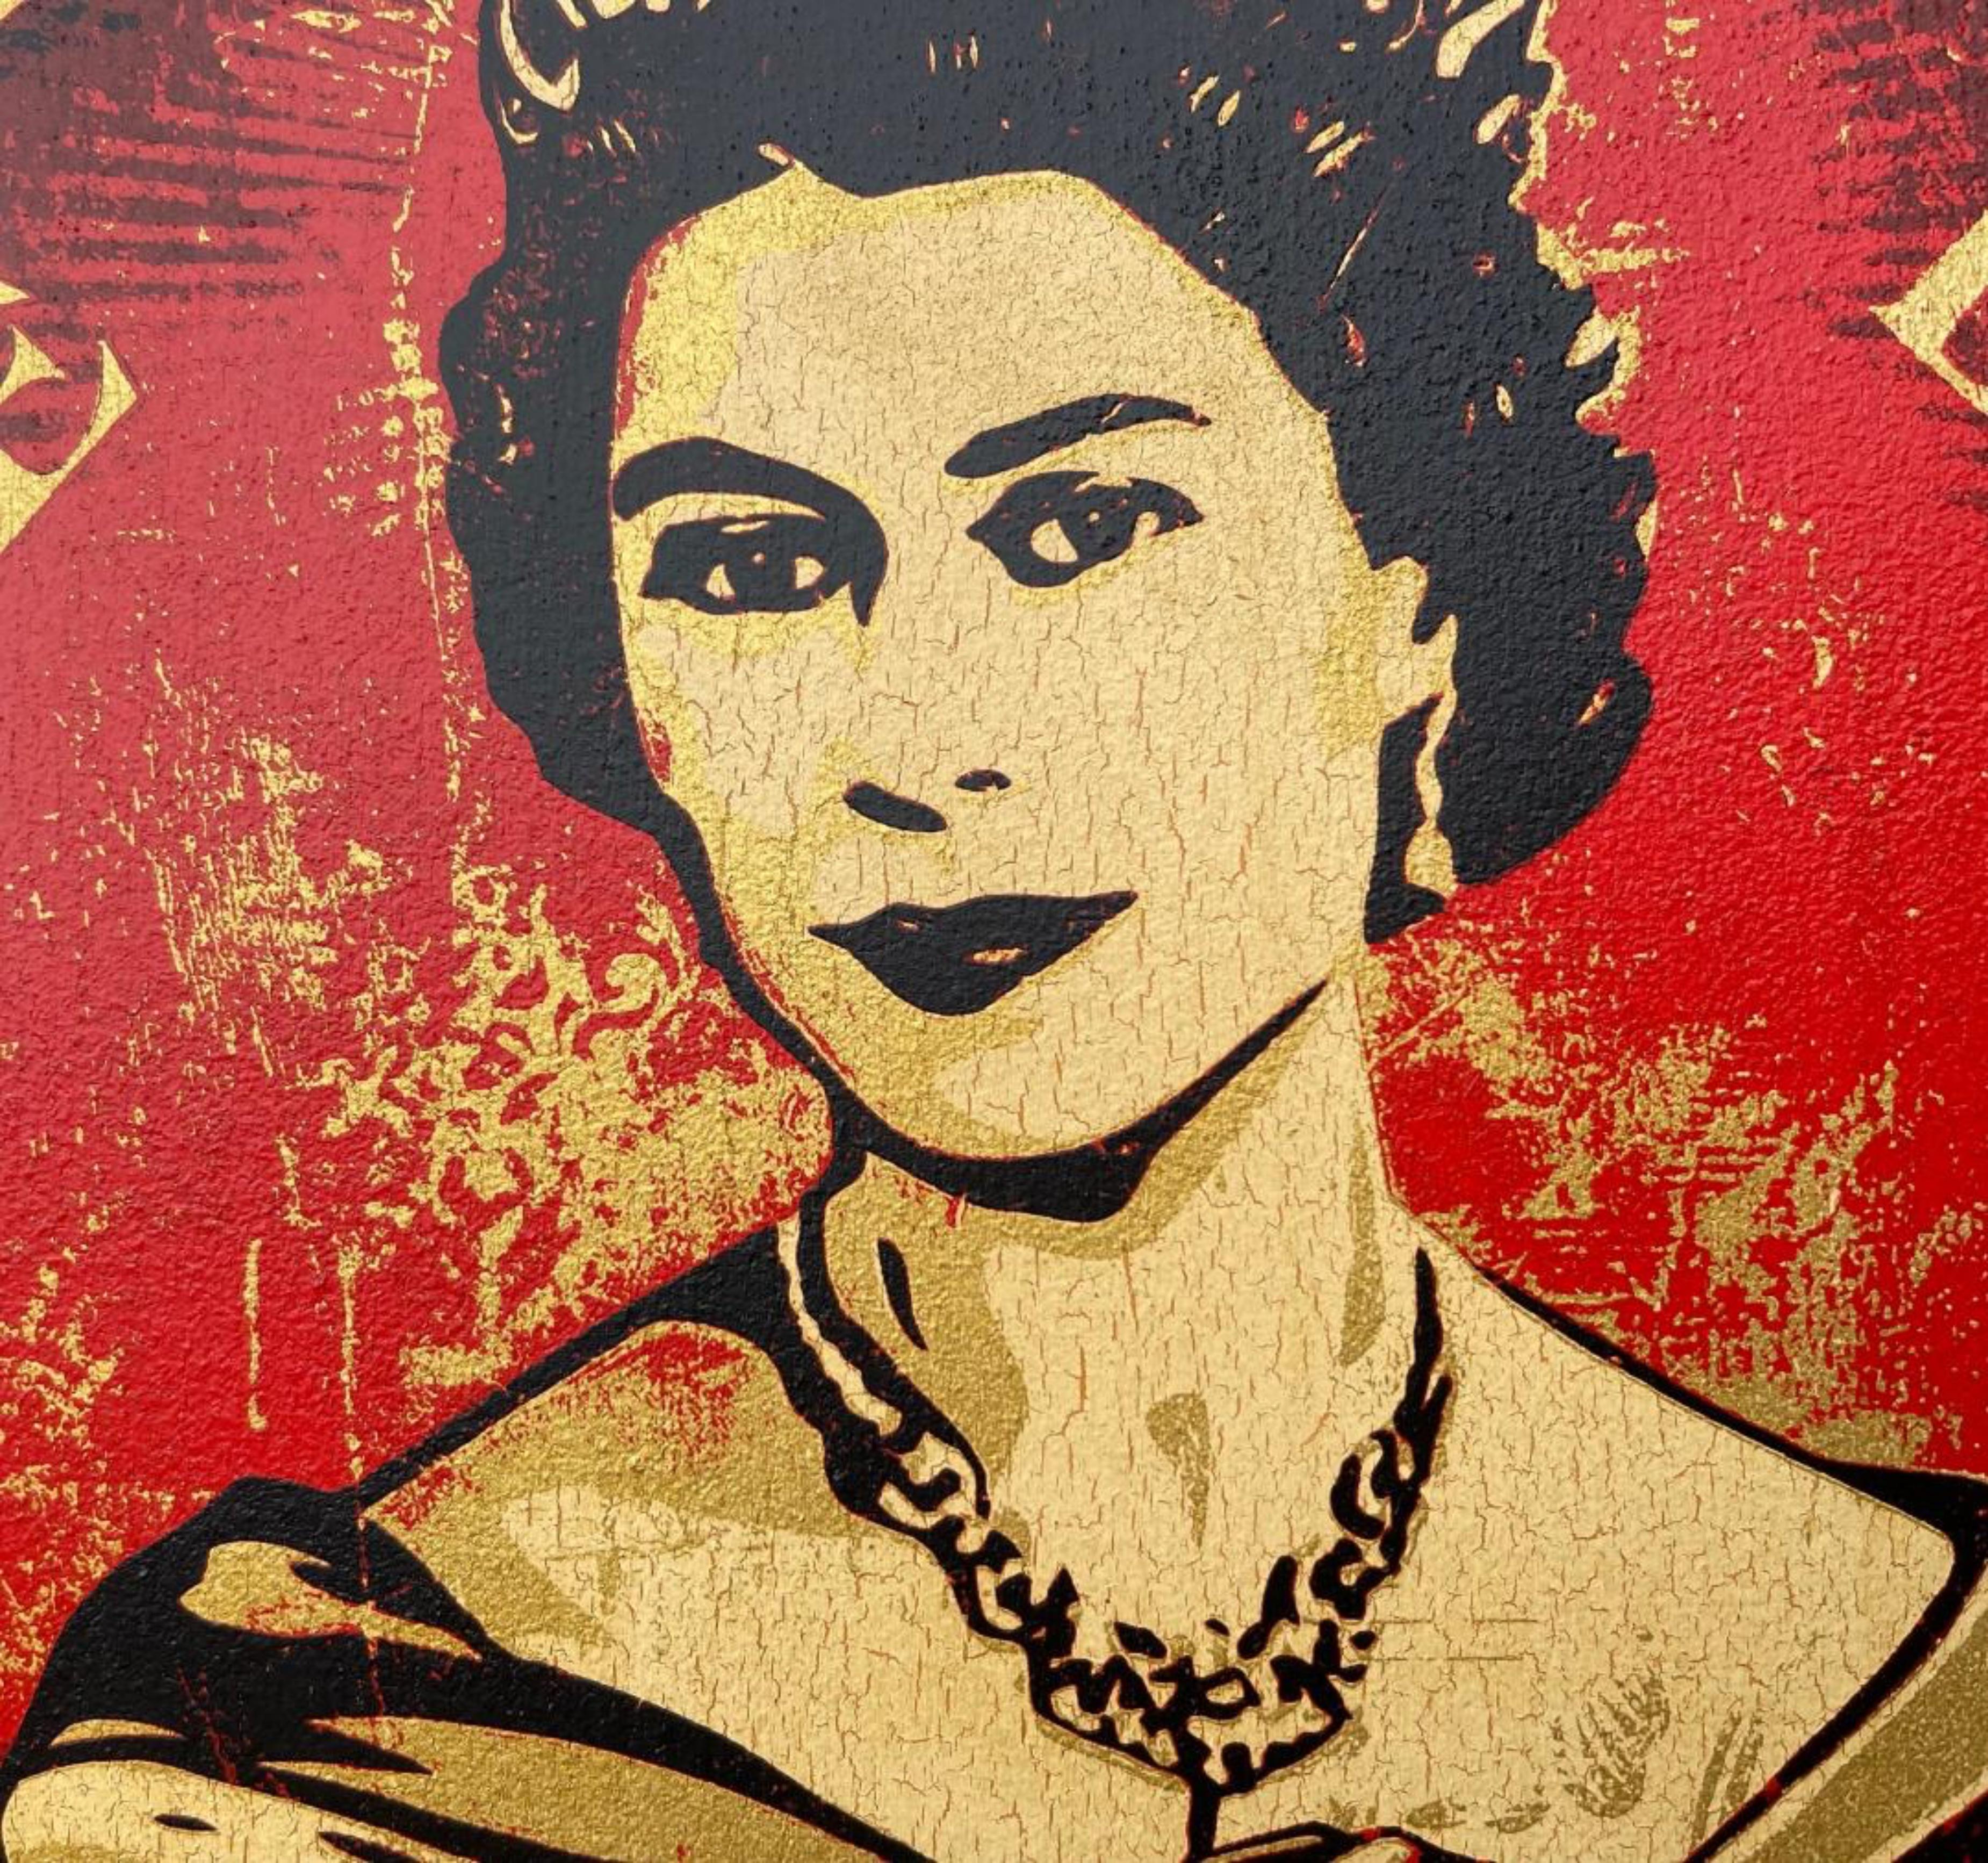 Shepard Fairey
God Save the Queen, 2012
Screenprint on wood panel in artist's frame
Hand-signed by artist, Signed twice: Pencil signed, dated and annotated AP on the front; also pencil signed, dated and annotated AP on the back of the board (see